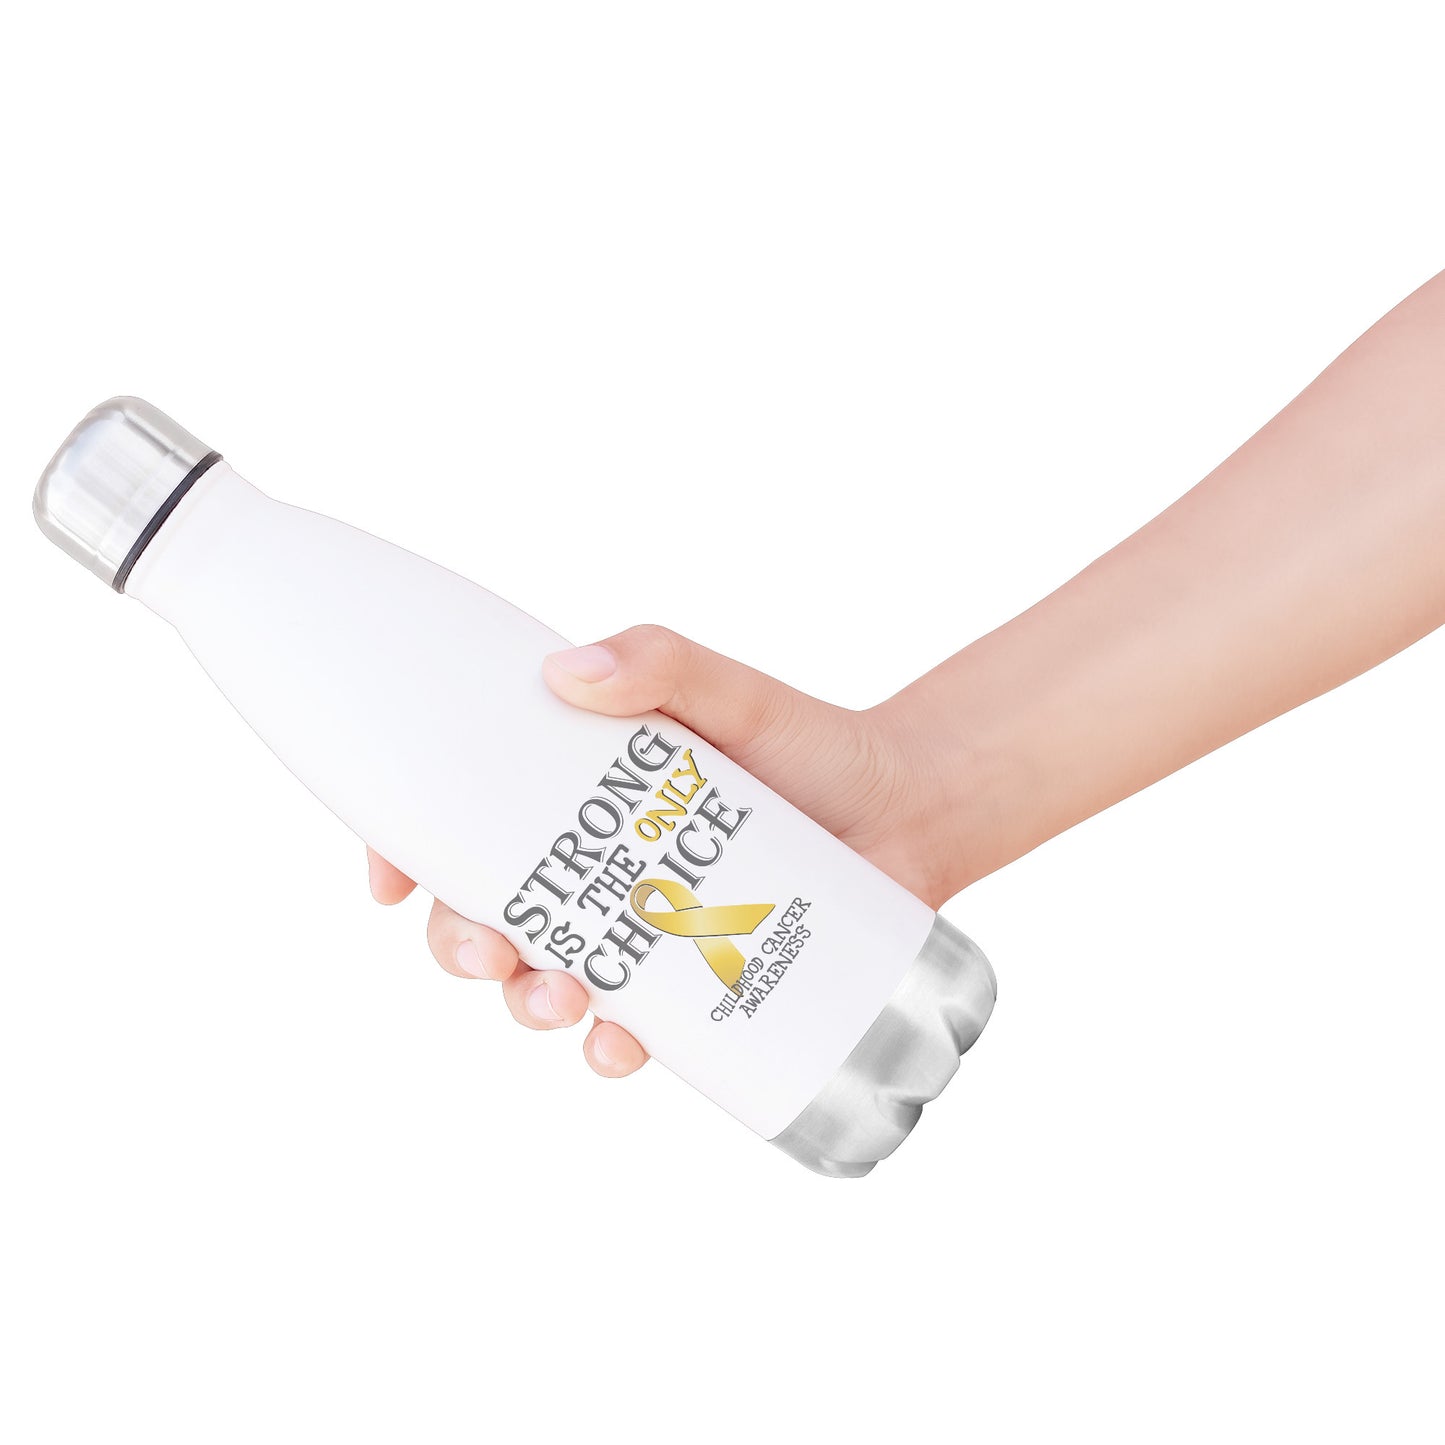 Strong is the Only Choice -Childhood Cancer Awareness 20oz Insulated Water Bottle